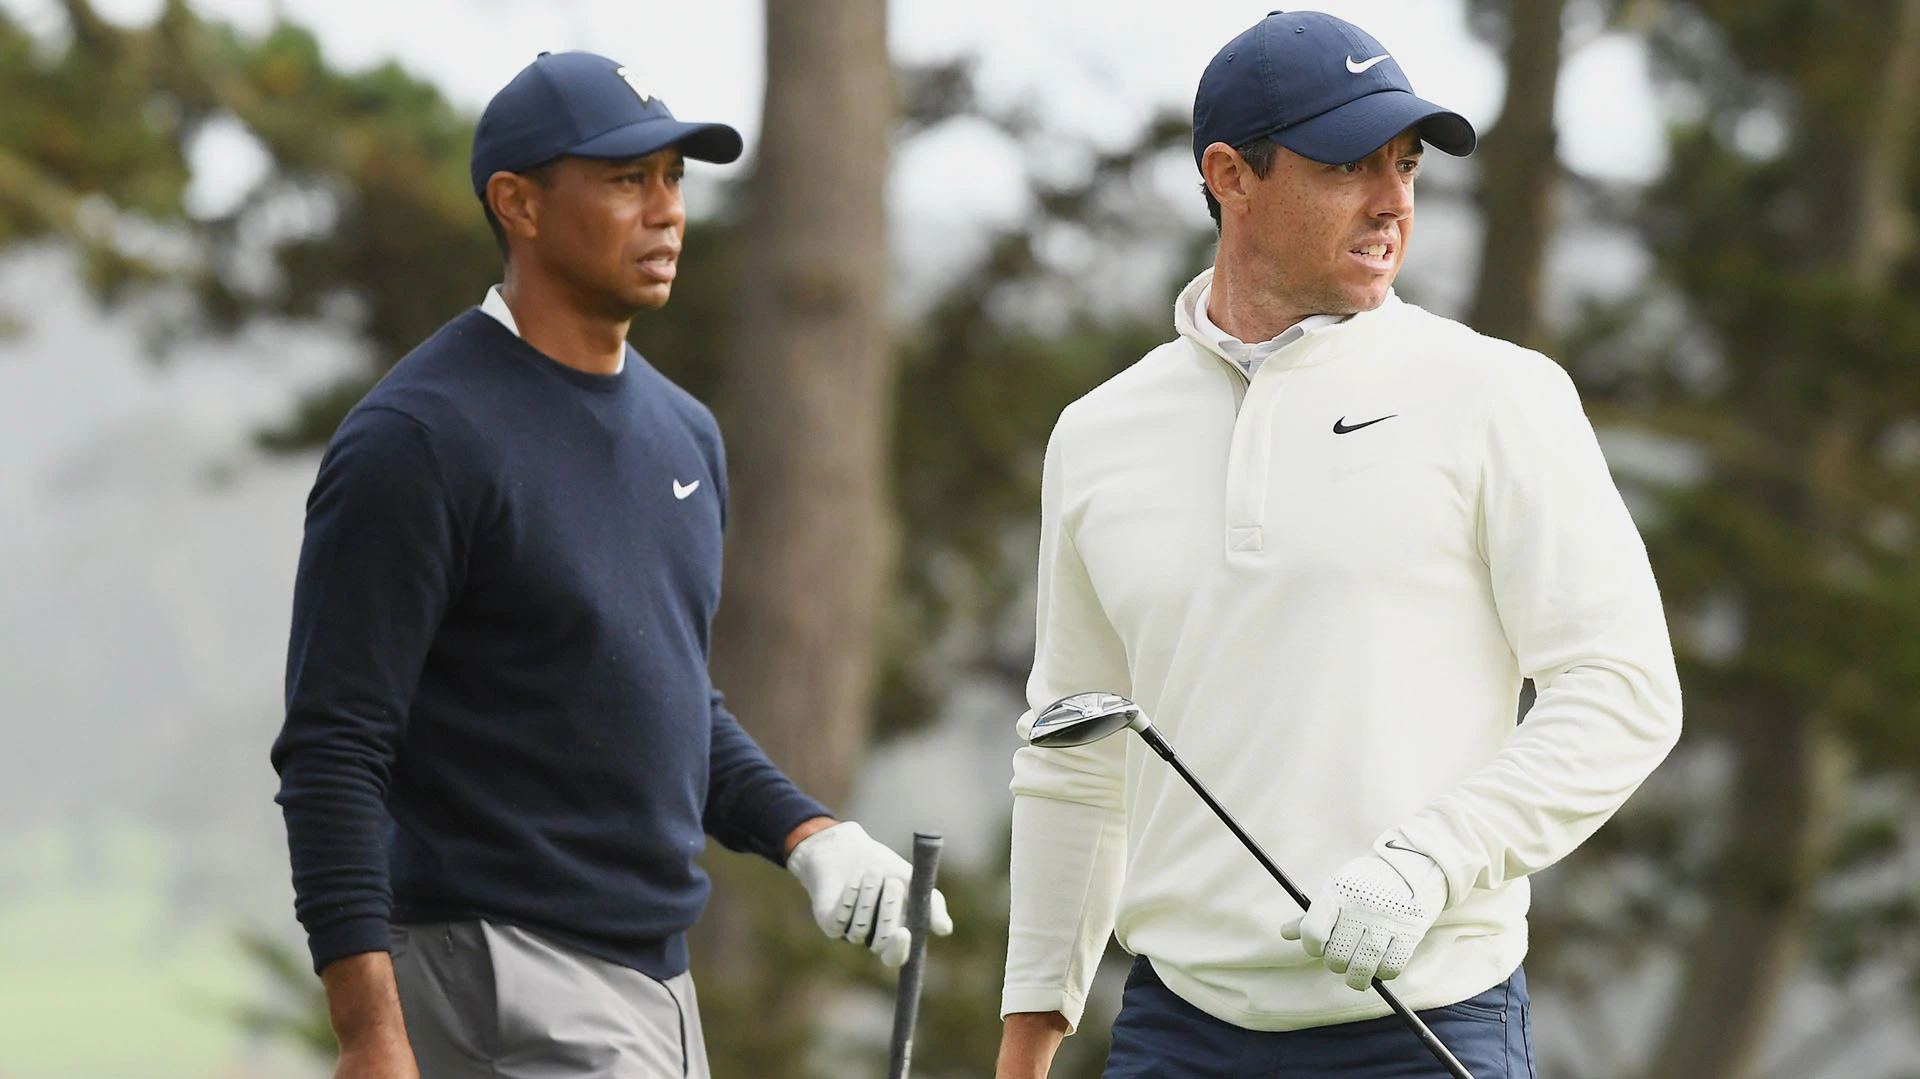 Rory McIlroy: Give me Tiger Woods pairings every round until fans come back